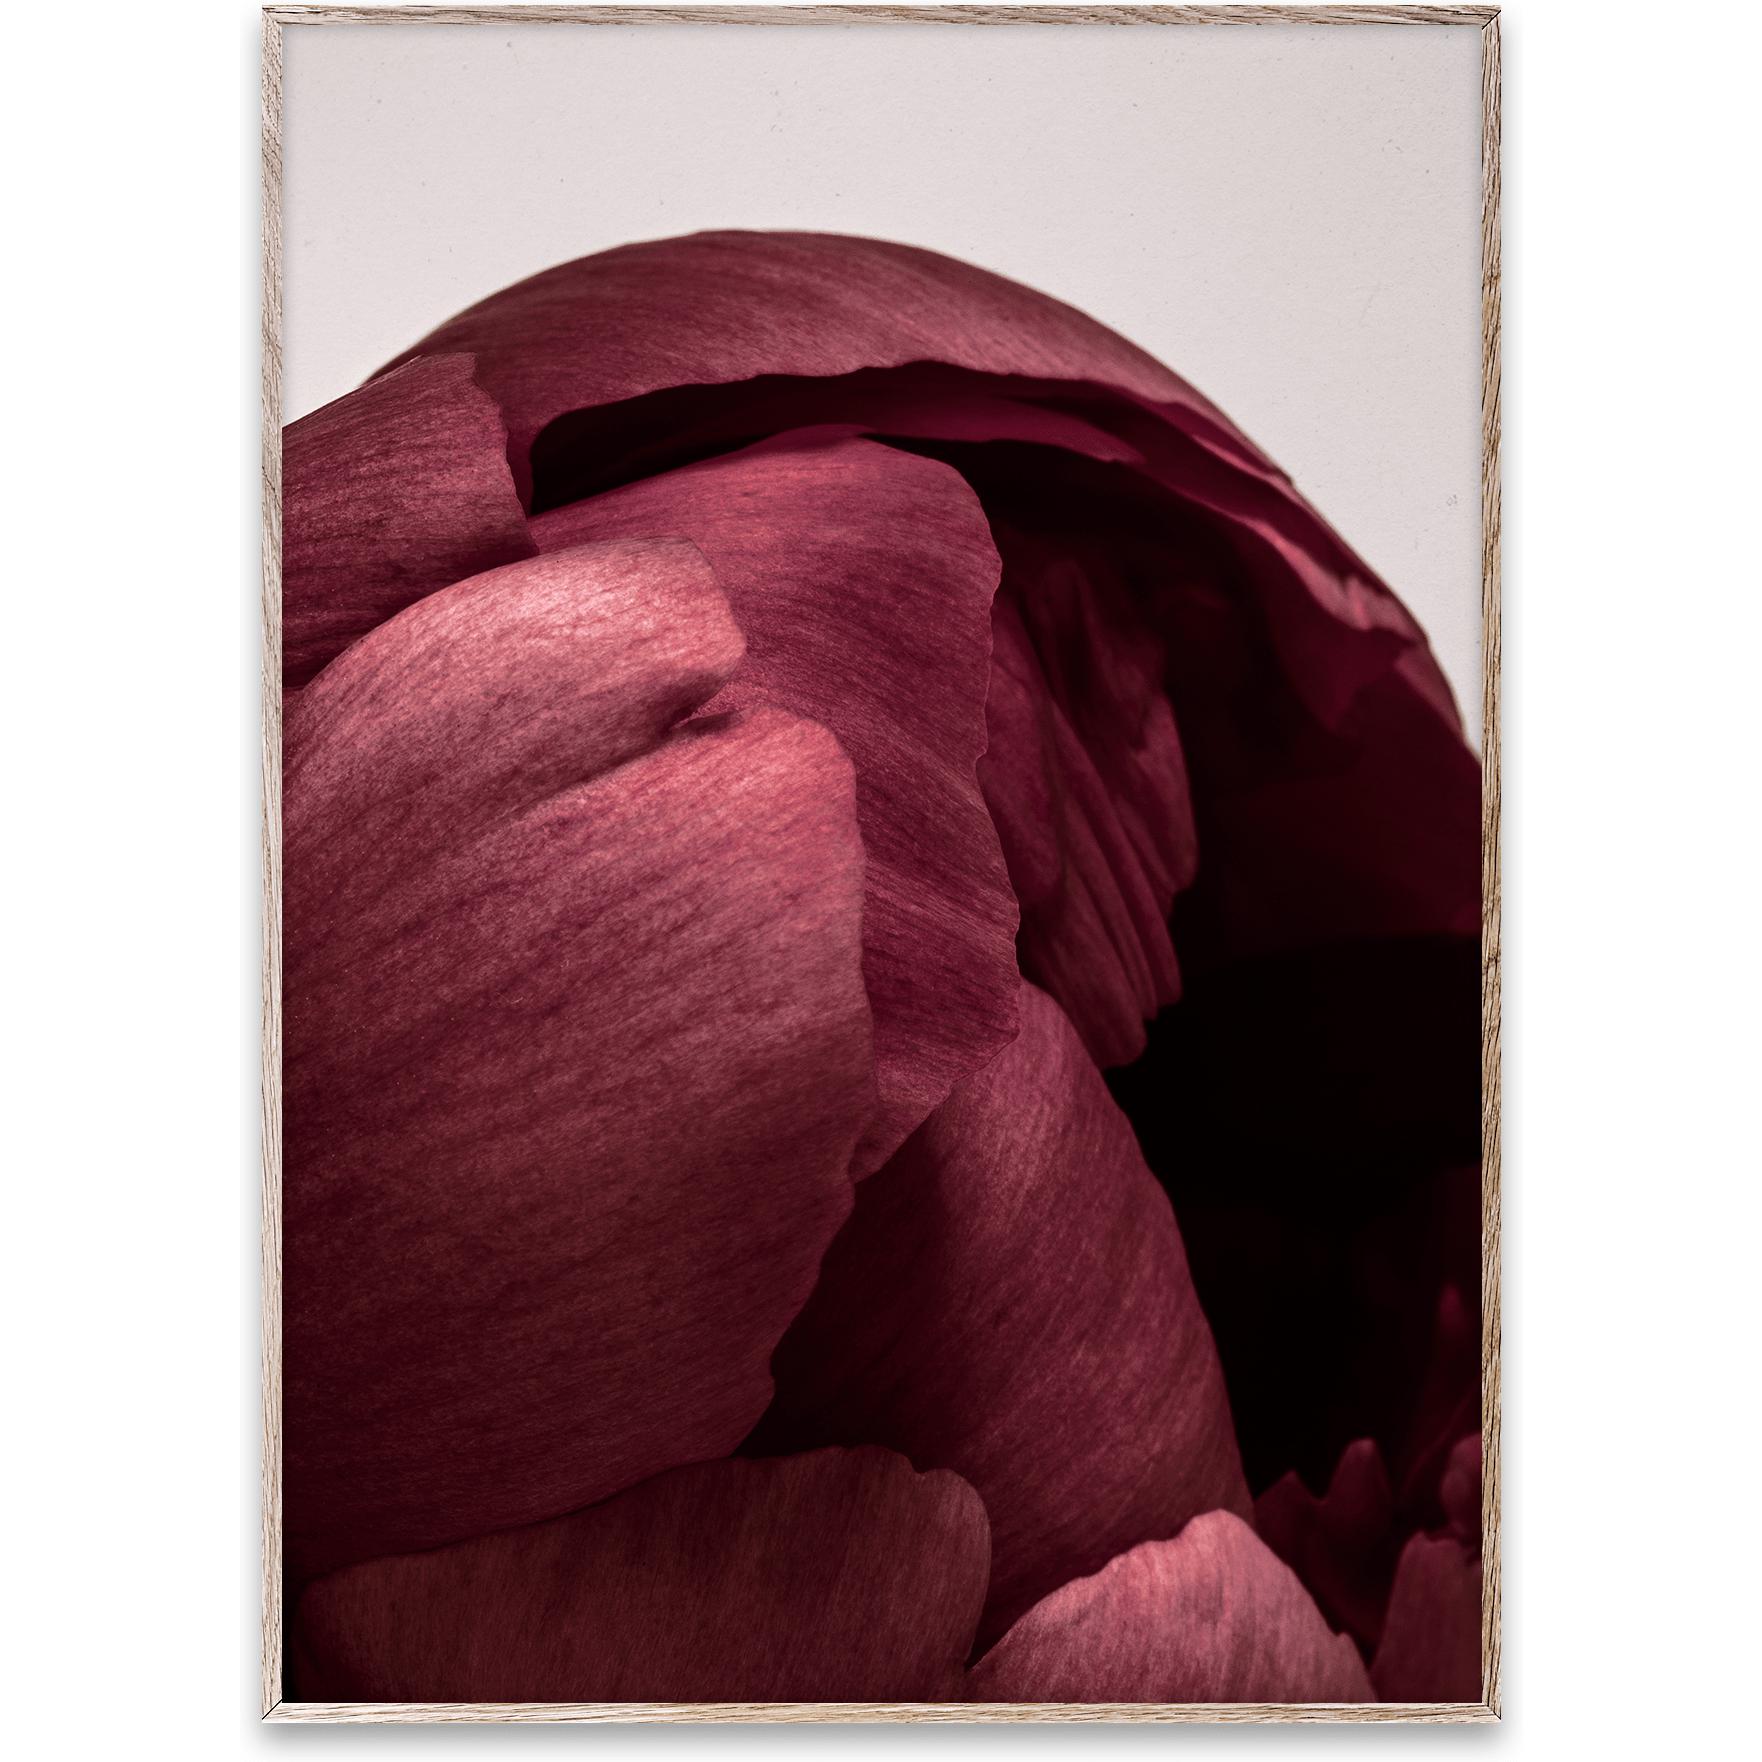 Paper Collective Peonia 01 -affisch, 50x70 cm